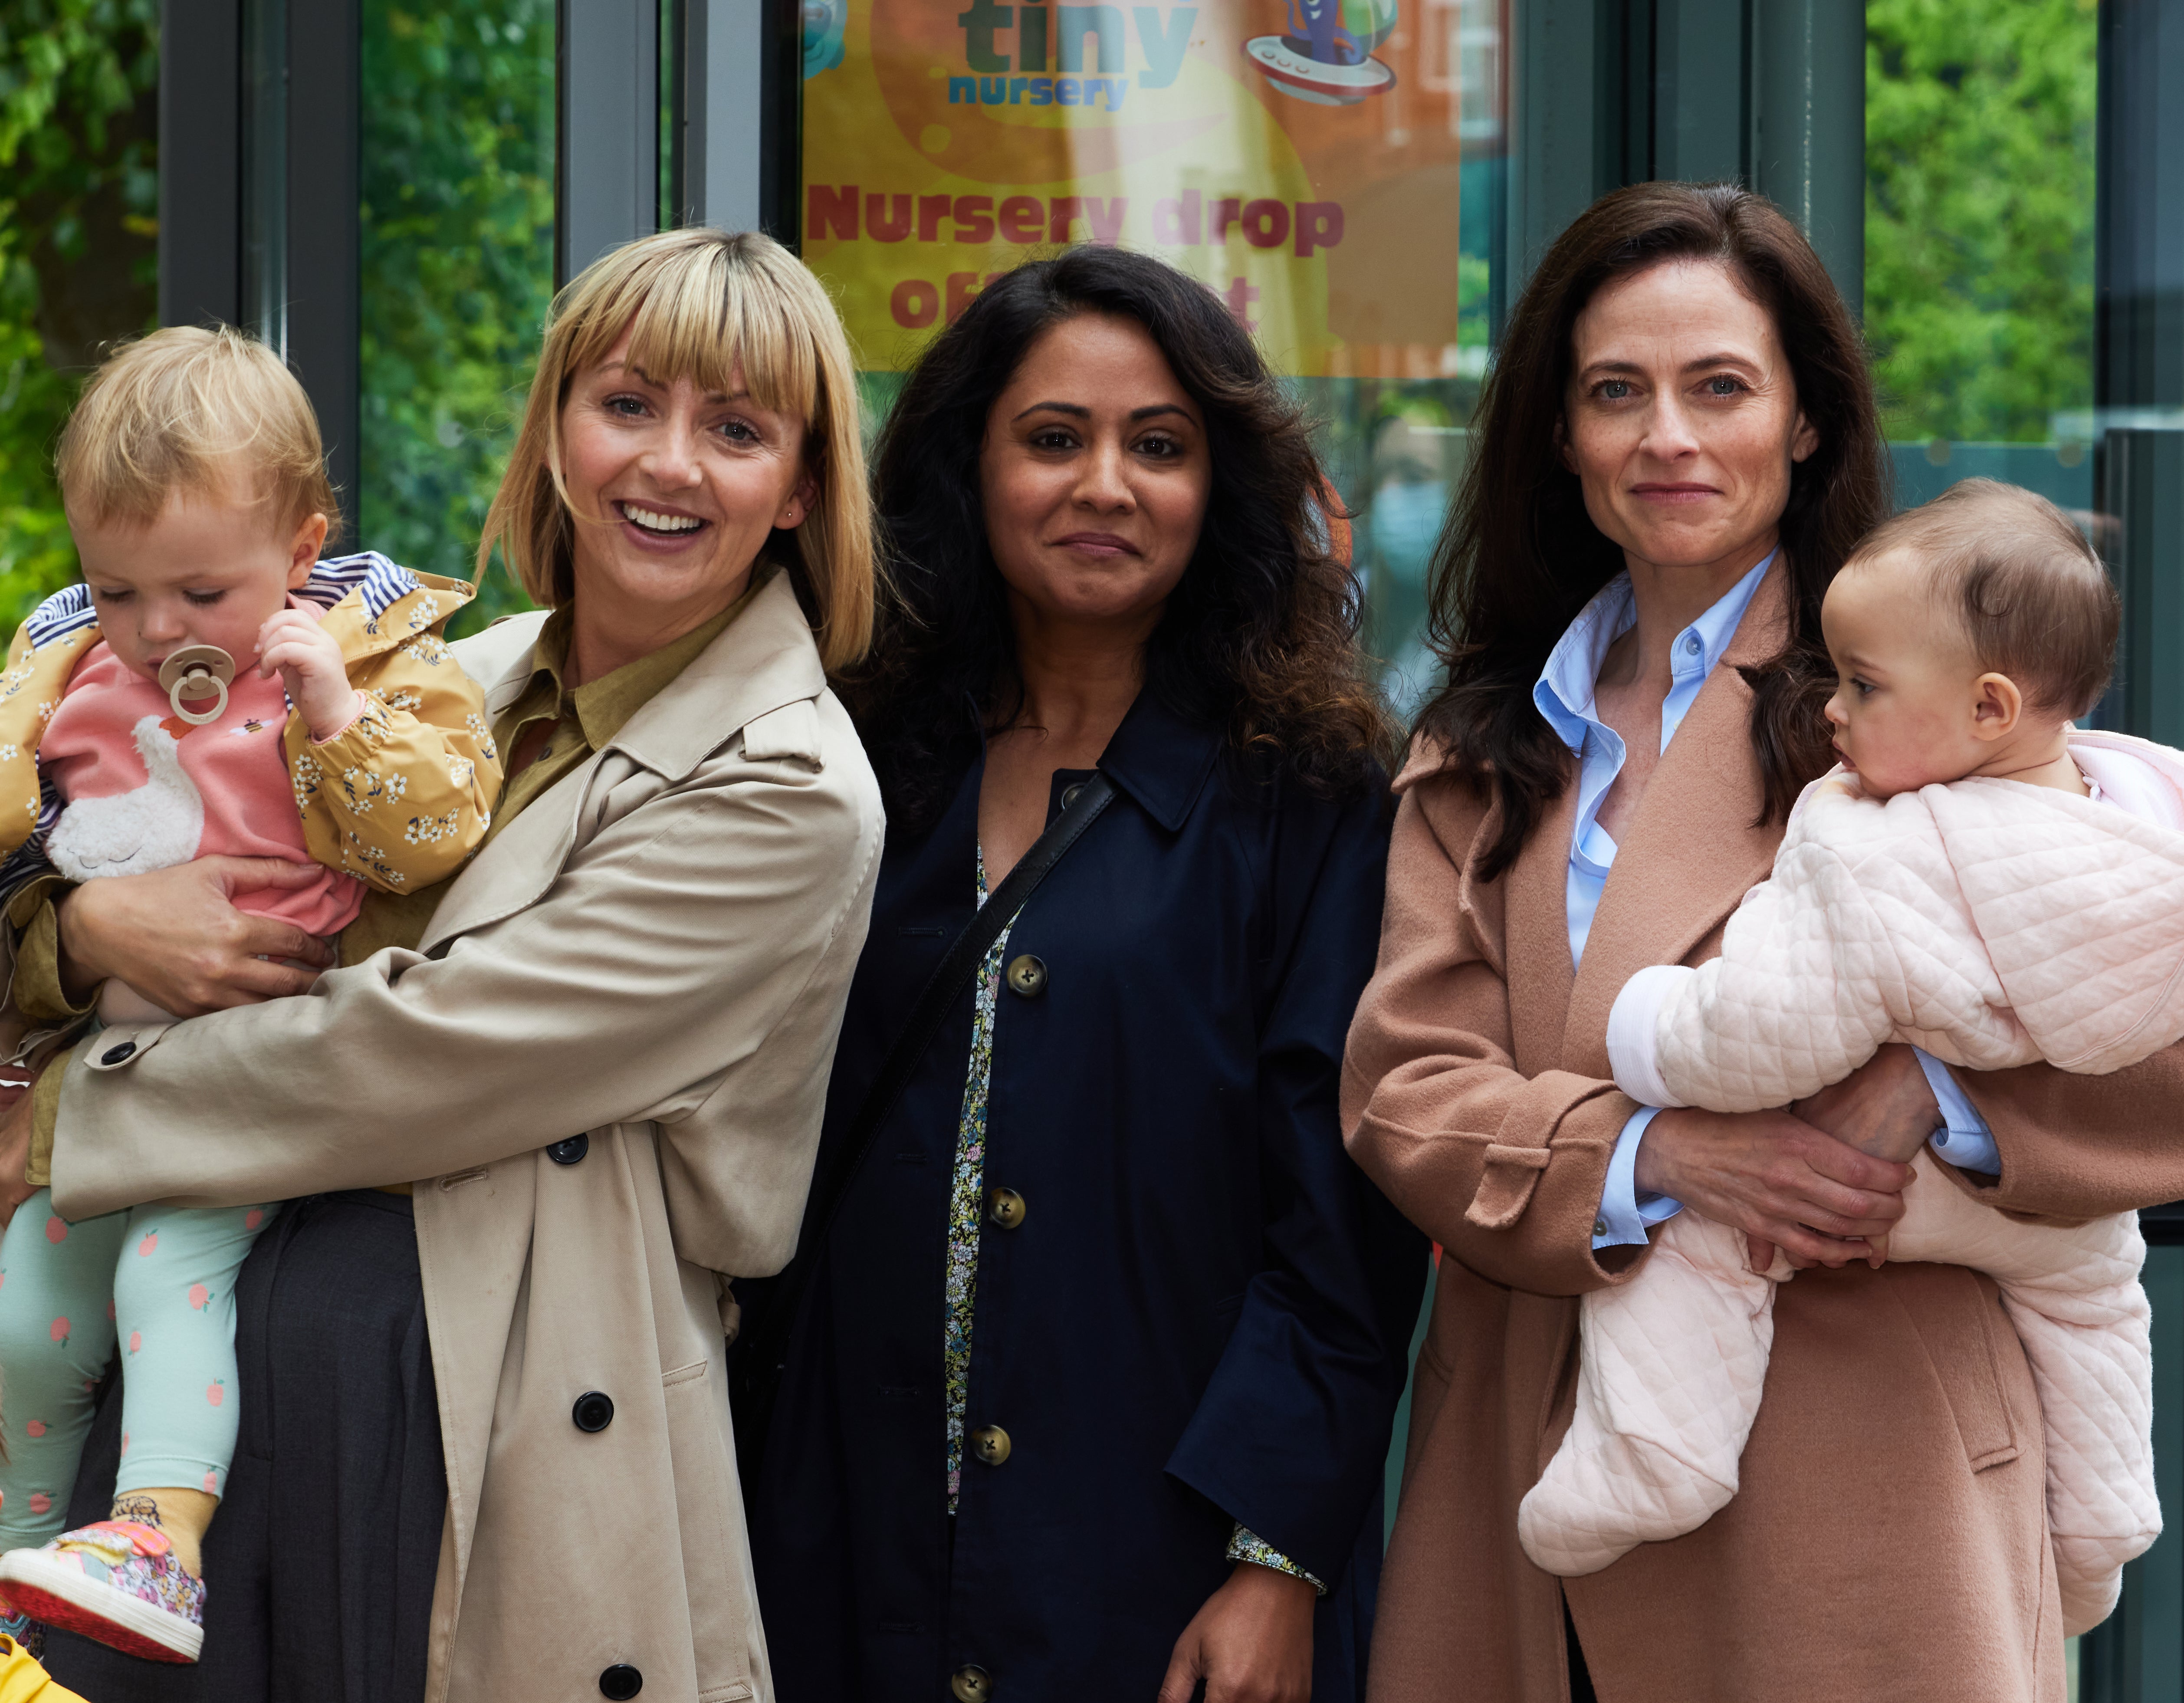 Maternal, ITVs new medical drama, captures working mothers in the raw The juggle is real The Independent